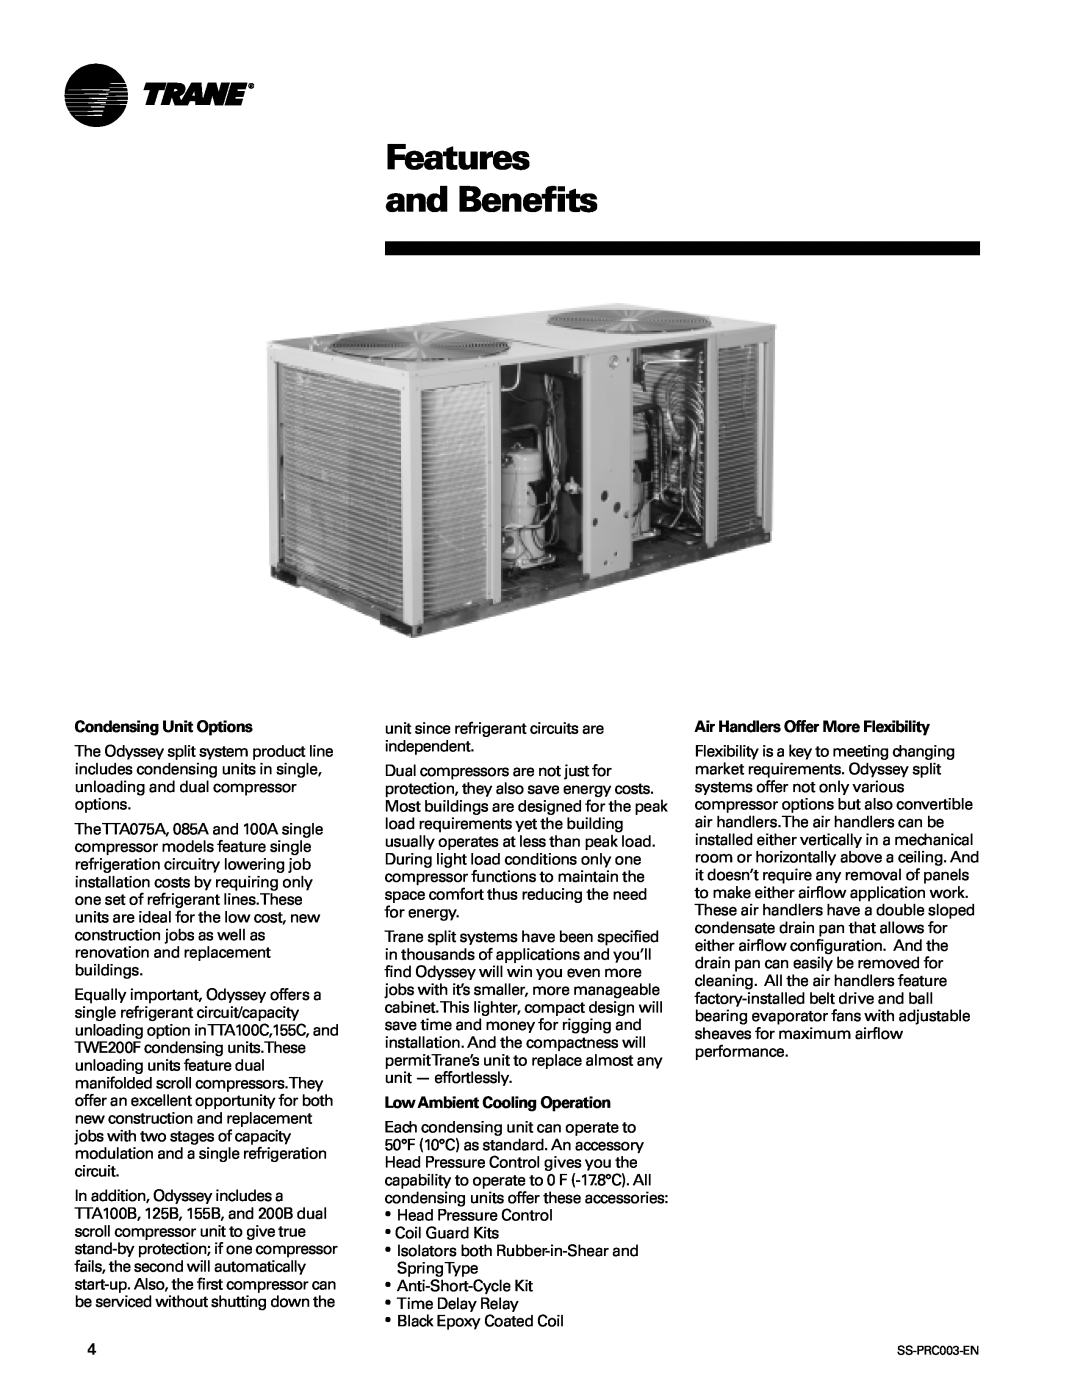 Trane SS-PRC003-EN manual Features and Benefits, Condensing Unit Options, Low Ambient Cooling Operation 